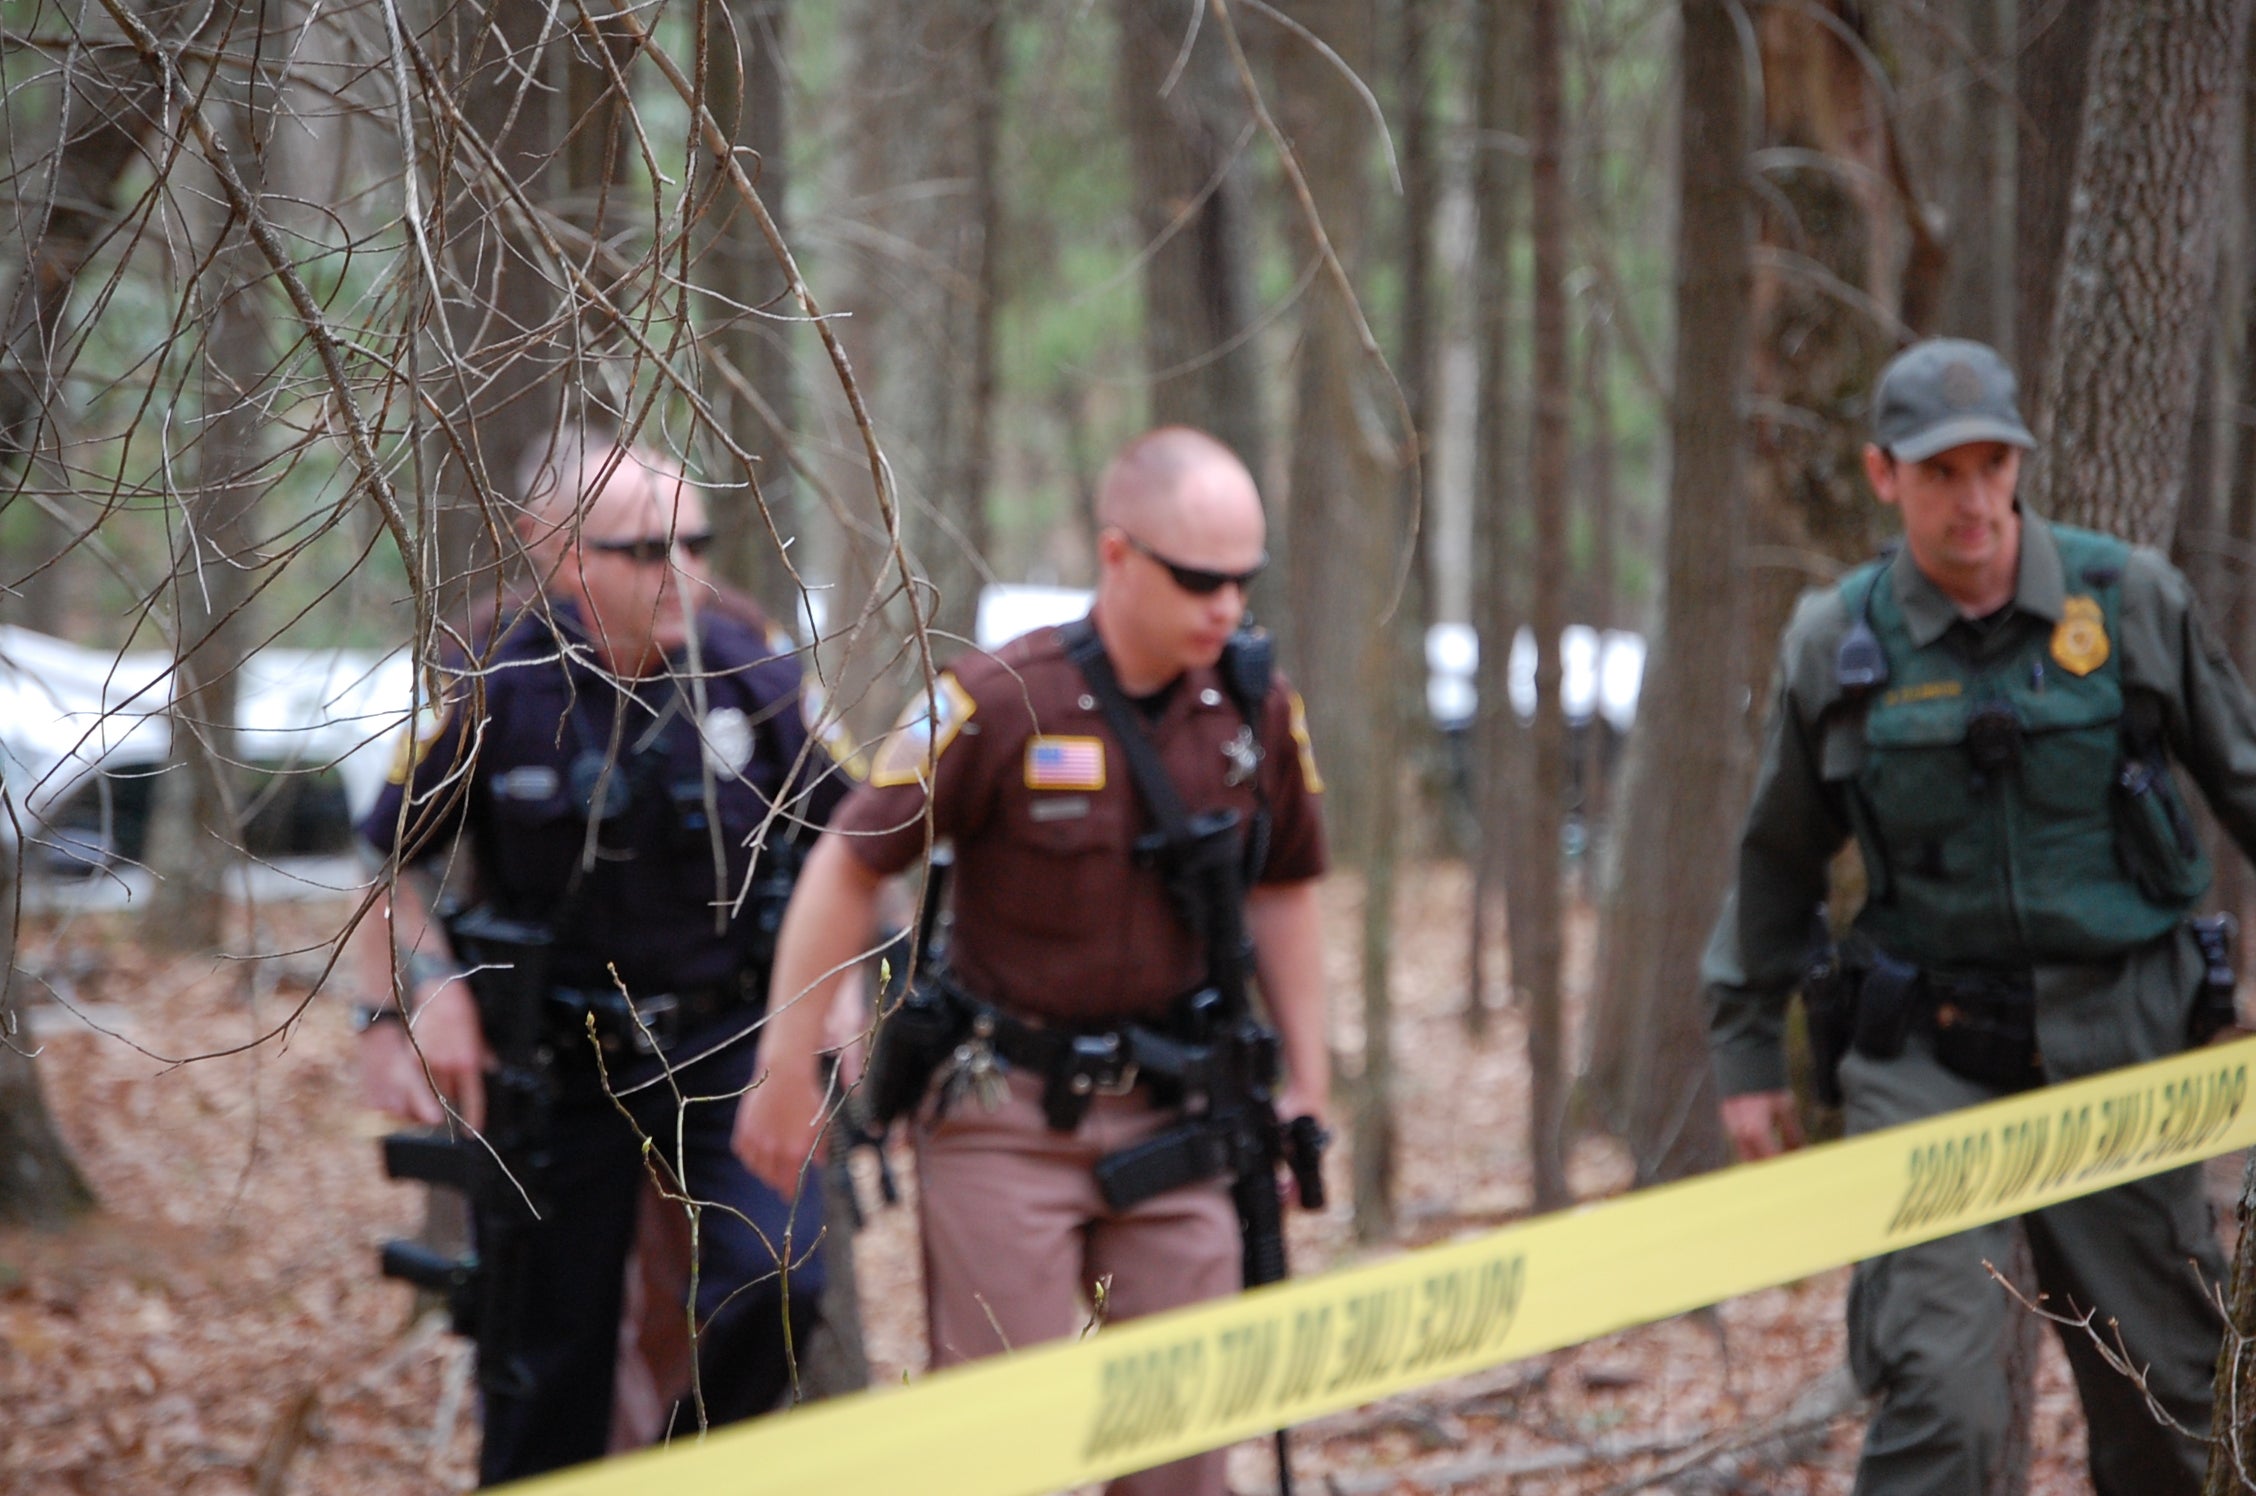 Law enforcement officers approach one of the camps around the tree sitters